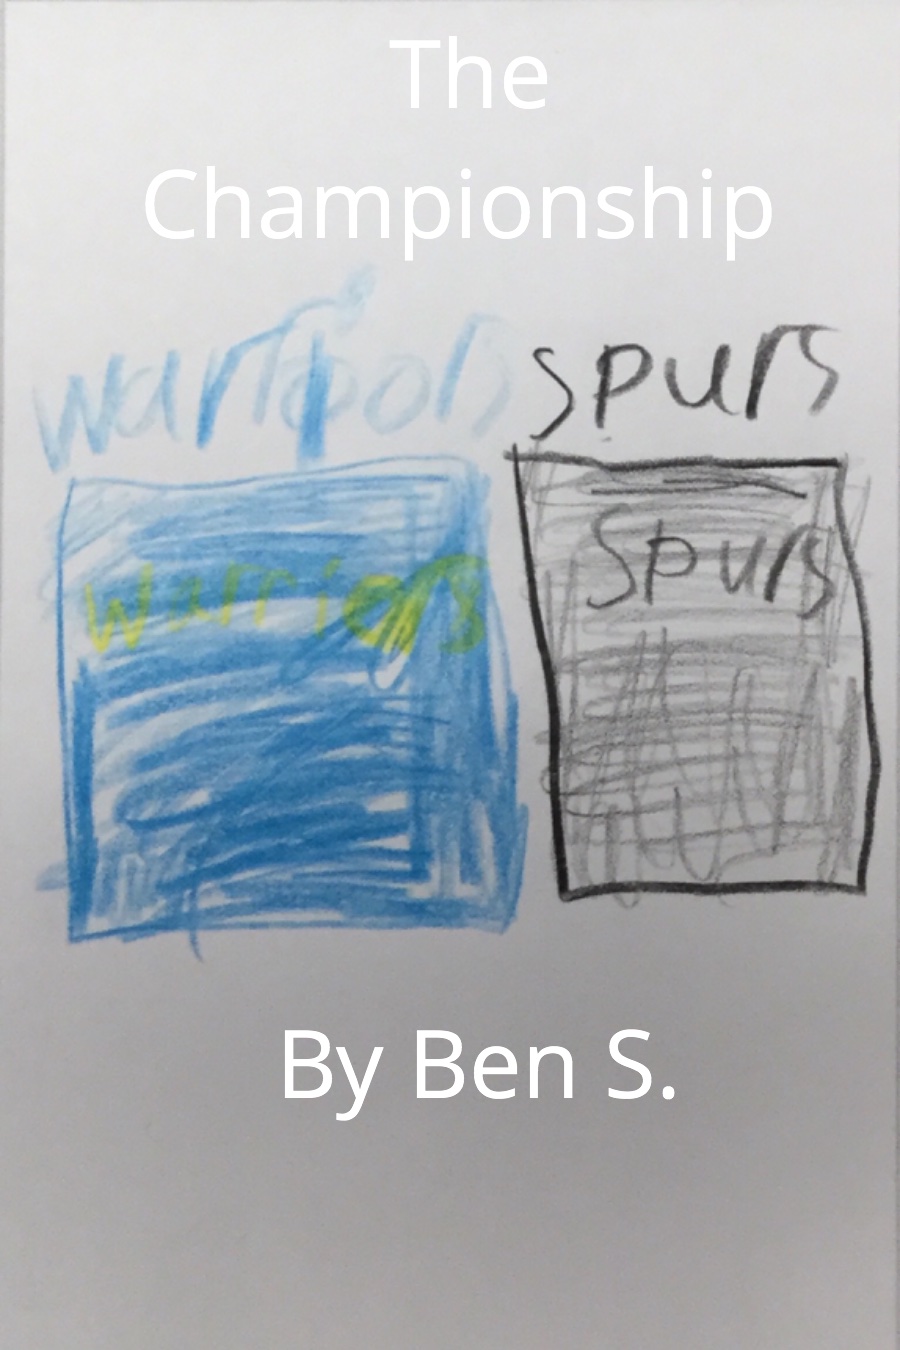 The Championship by Ben S